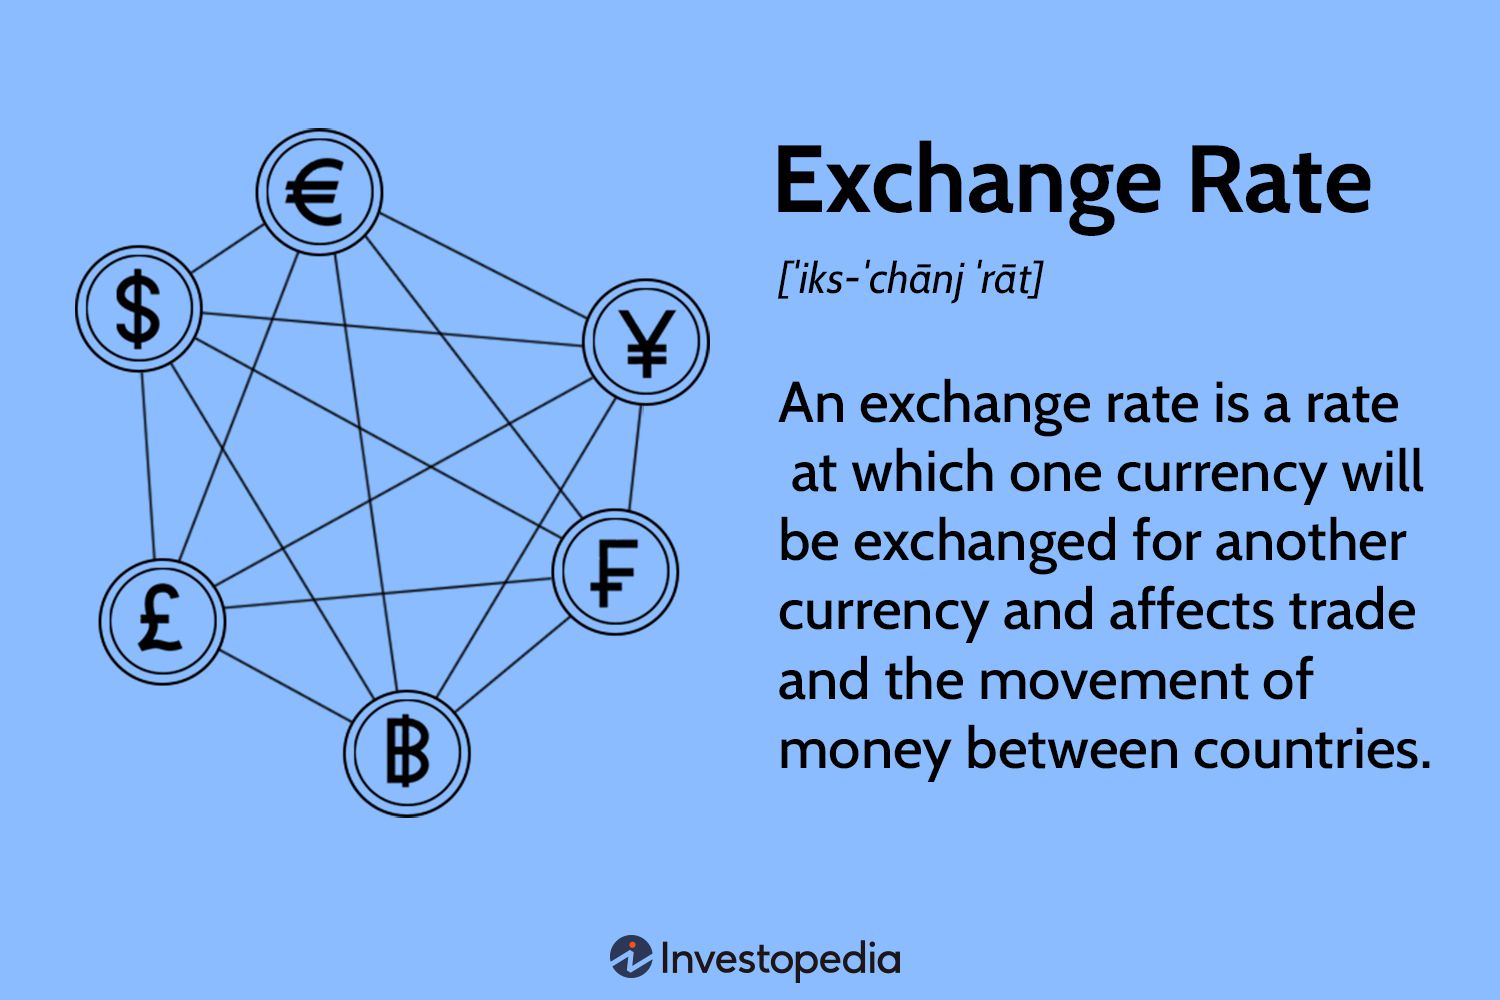 Foreign Exchange Market: How It Works, History, and Pros and Cons